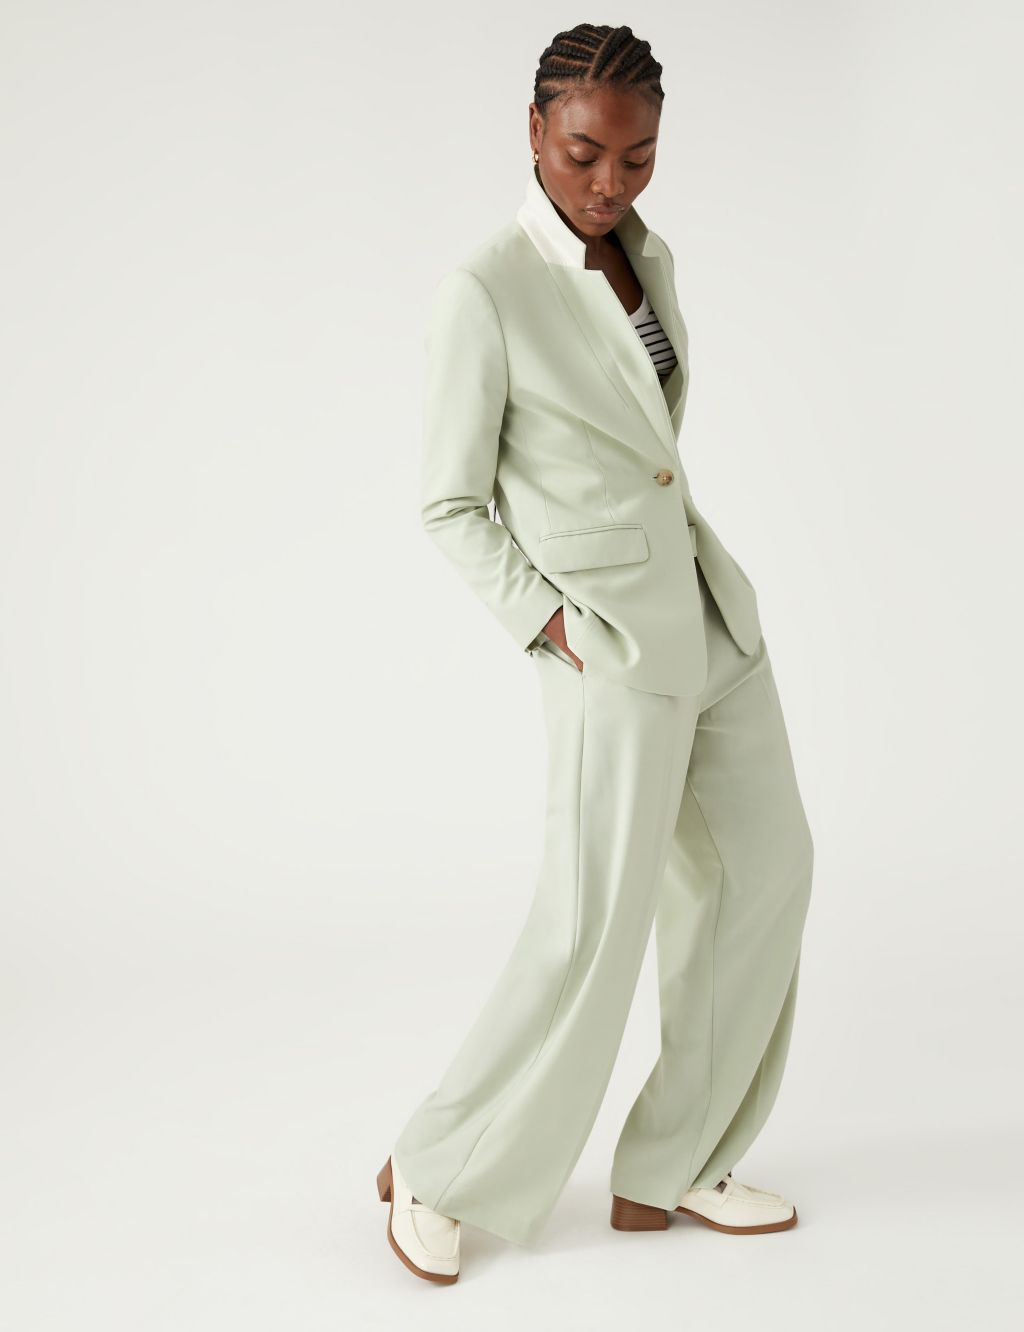 Marl Pleat Front Wide Leg Trousers image 4